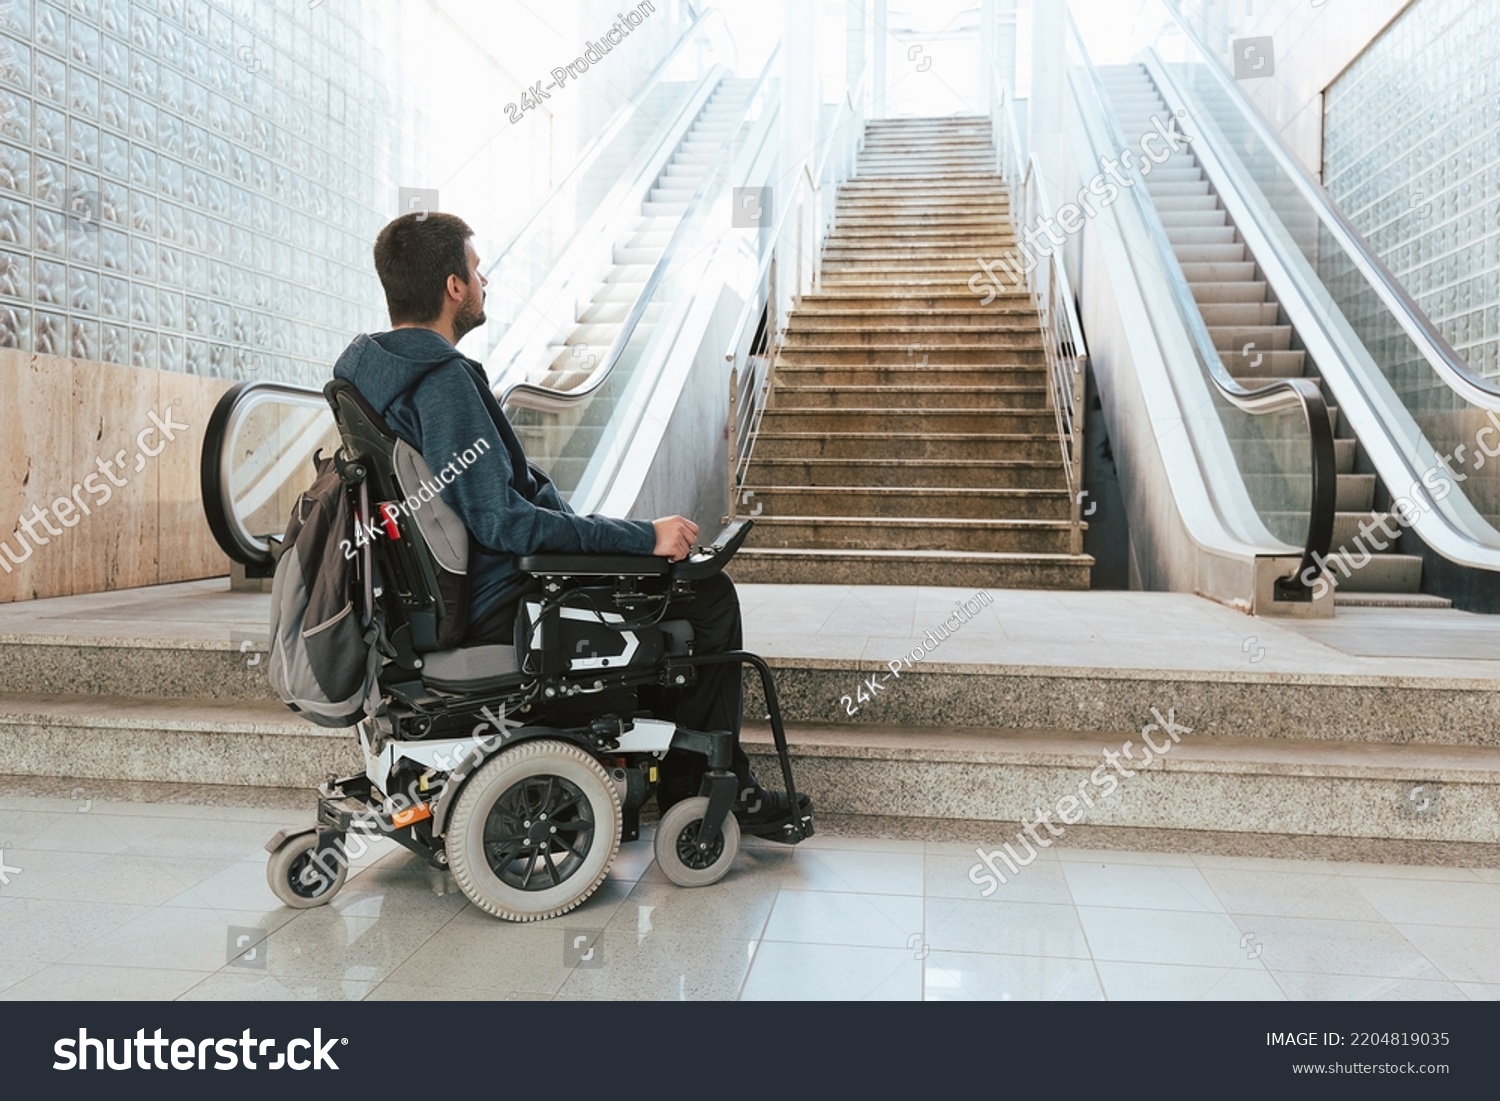 Man with disability on wheelchair stopped in front of staircase, raising awareness of architectural barriers and accessibility issues #2204819035